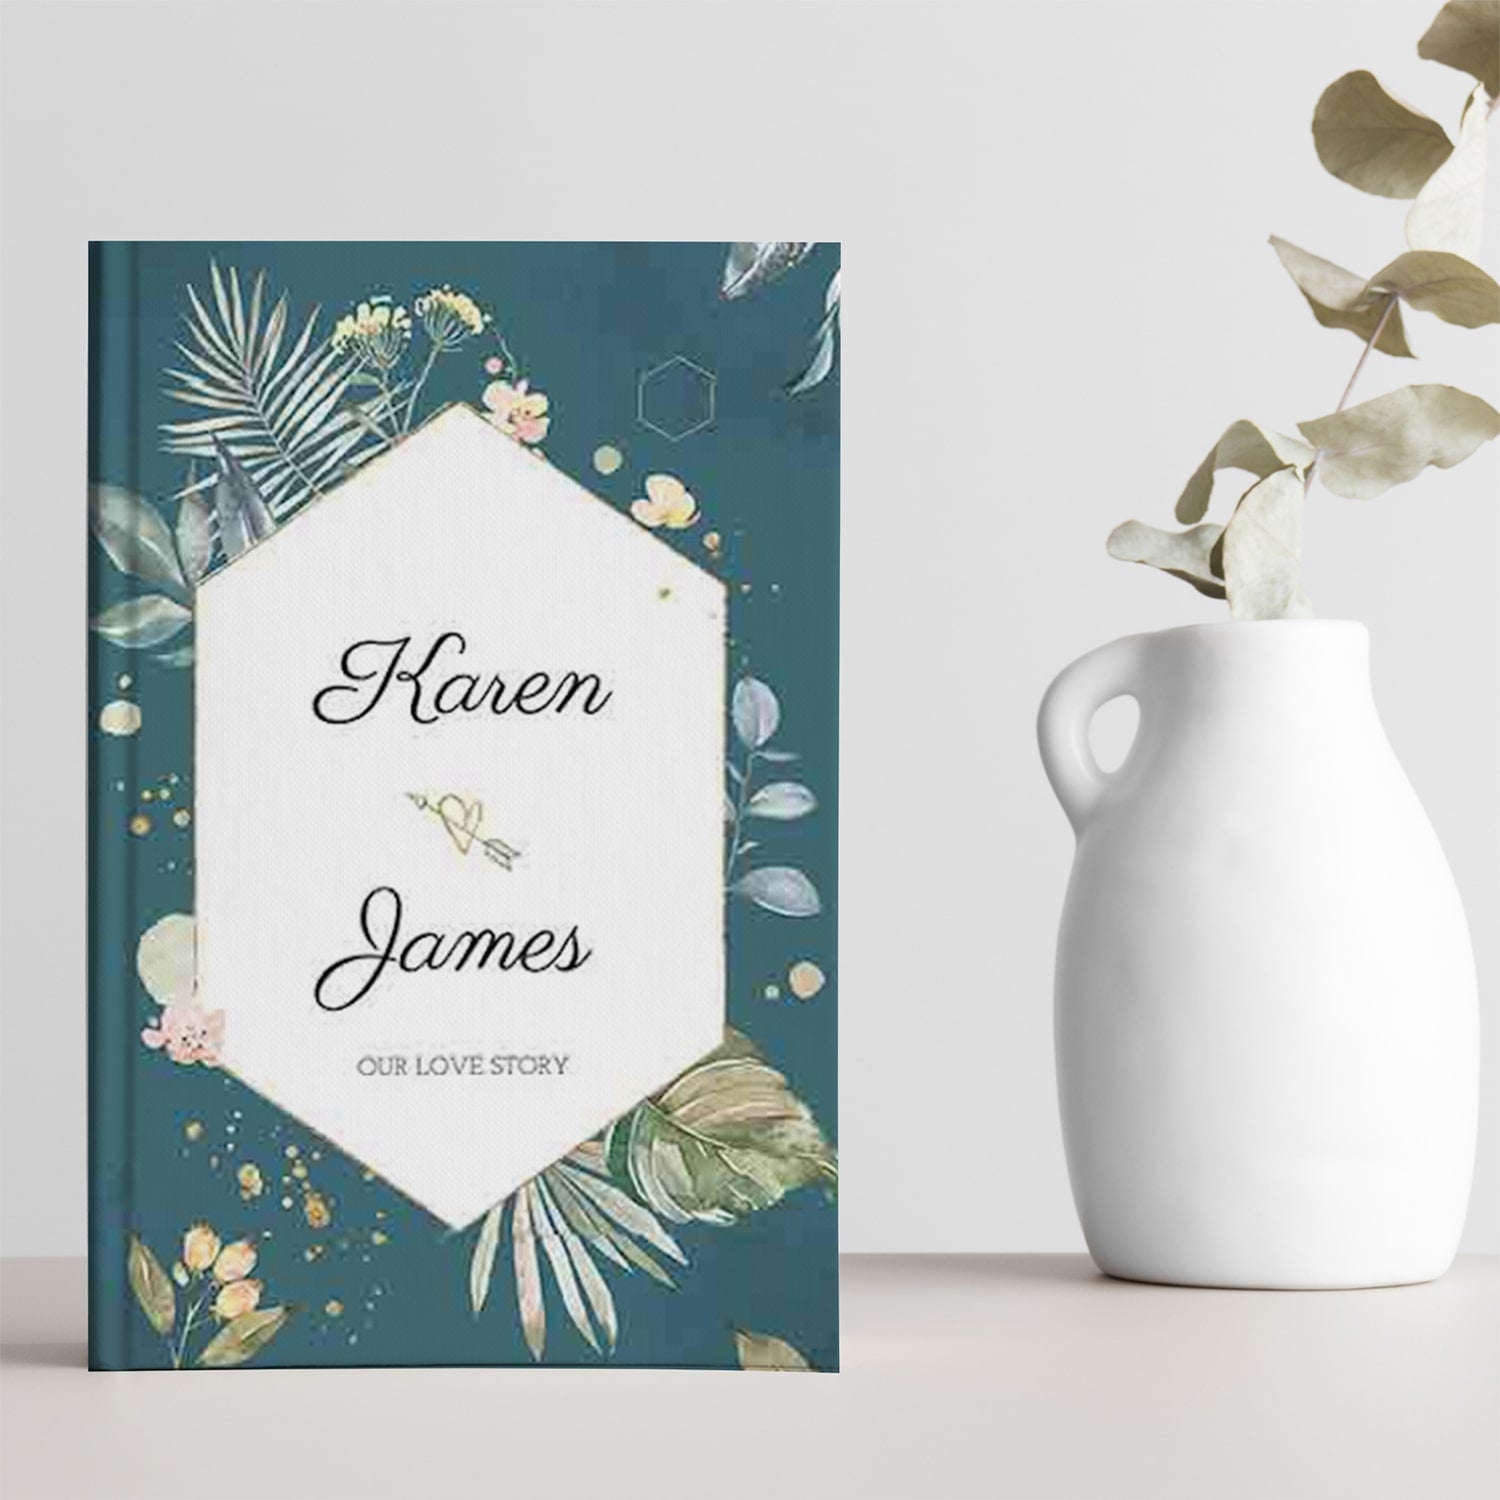 Personalized Mother's Day Gift, Custom Book For Mom - Luhvee Books